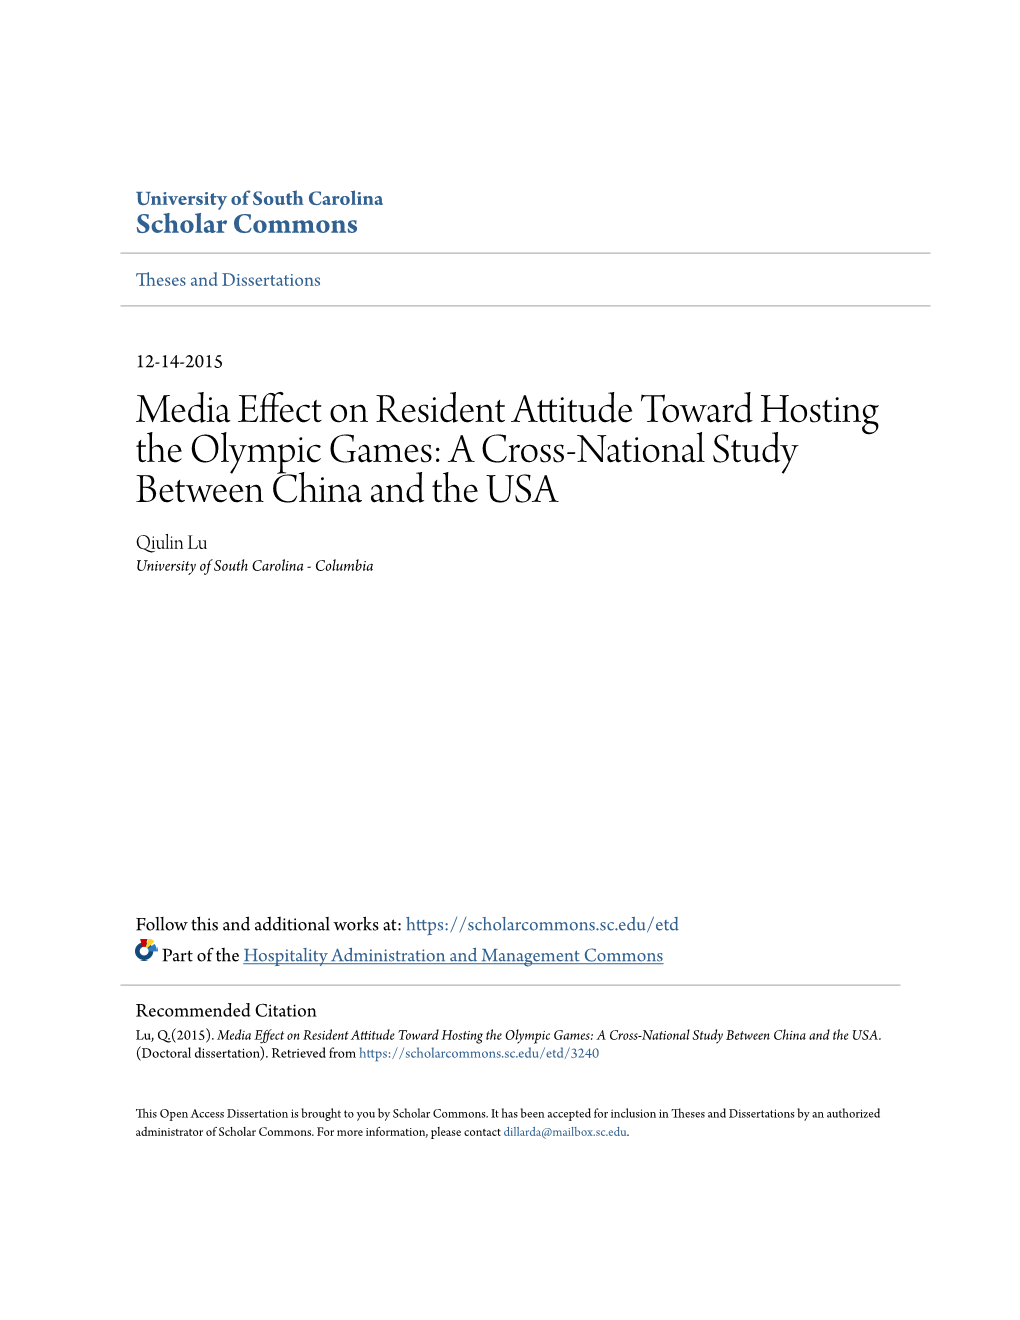 Media Effect on Resident Attitude Toward Hosting the Olympic Games: a Cross-National Study Between China and the USA Qiulin Lu University of South Carolina - Columbia